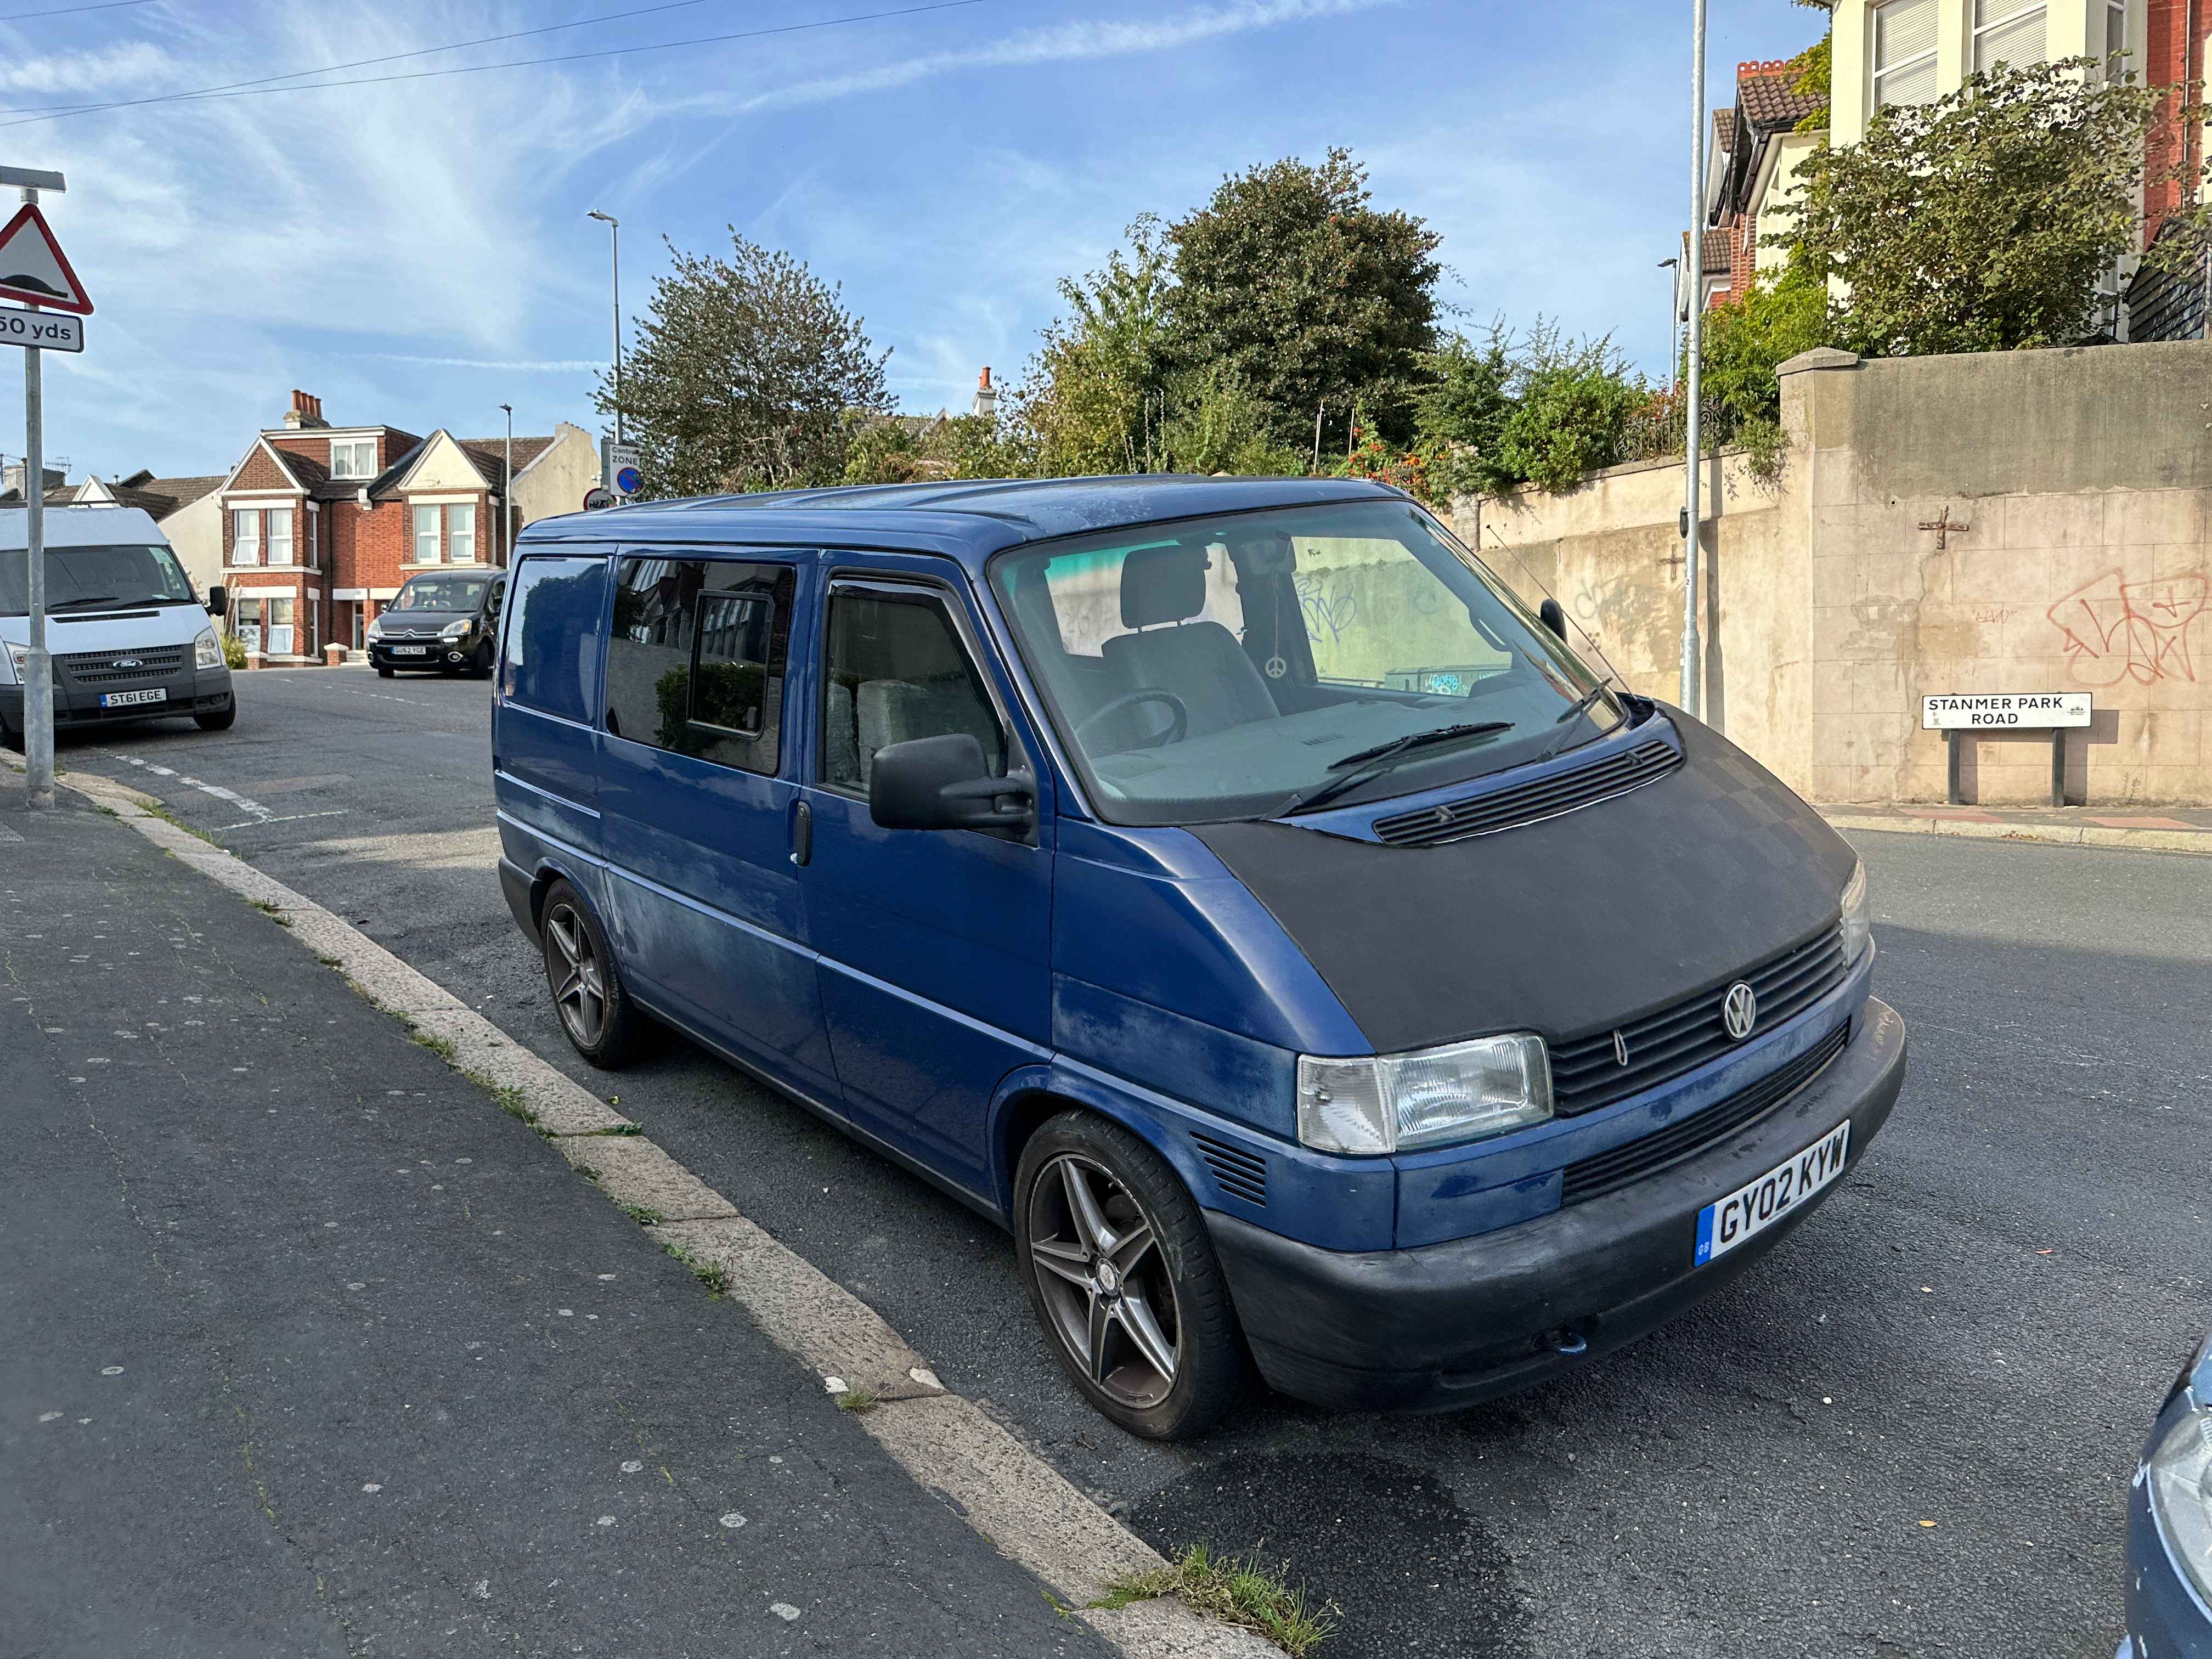 Photograph of GY02 KYW - a Blue Volkswagen Transporter camper van parked in Hollingdean by a non-resident. The eleventh of eighteen photographs supplied by the residents of Hollingdean.